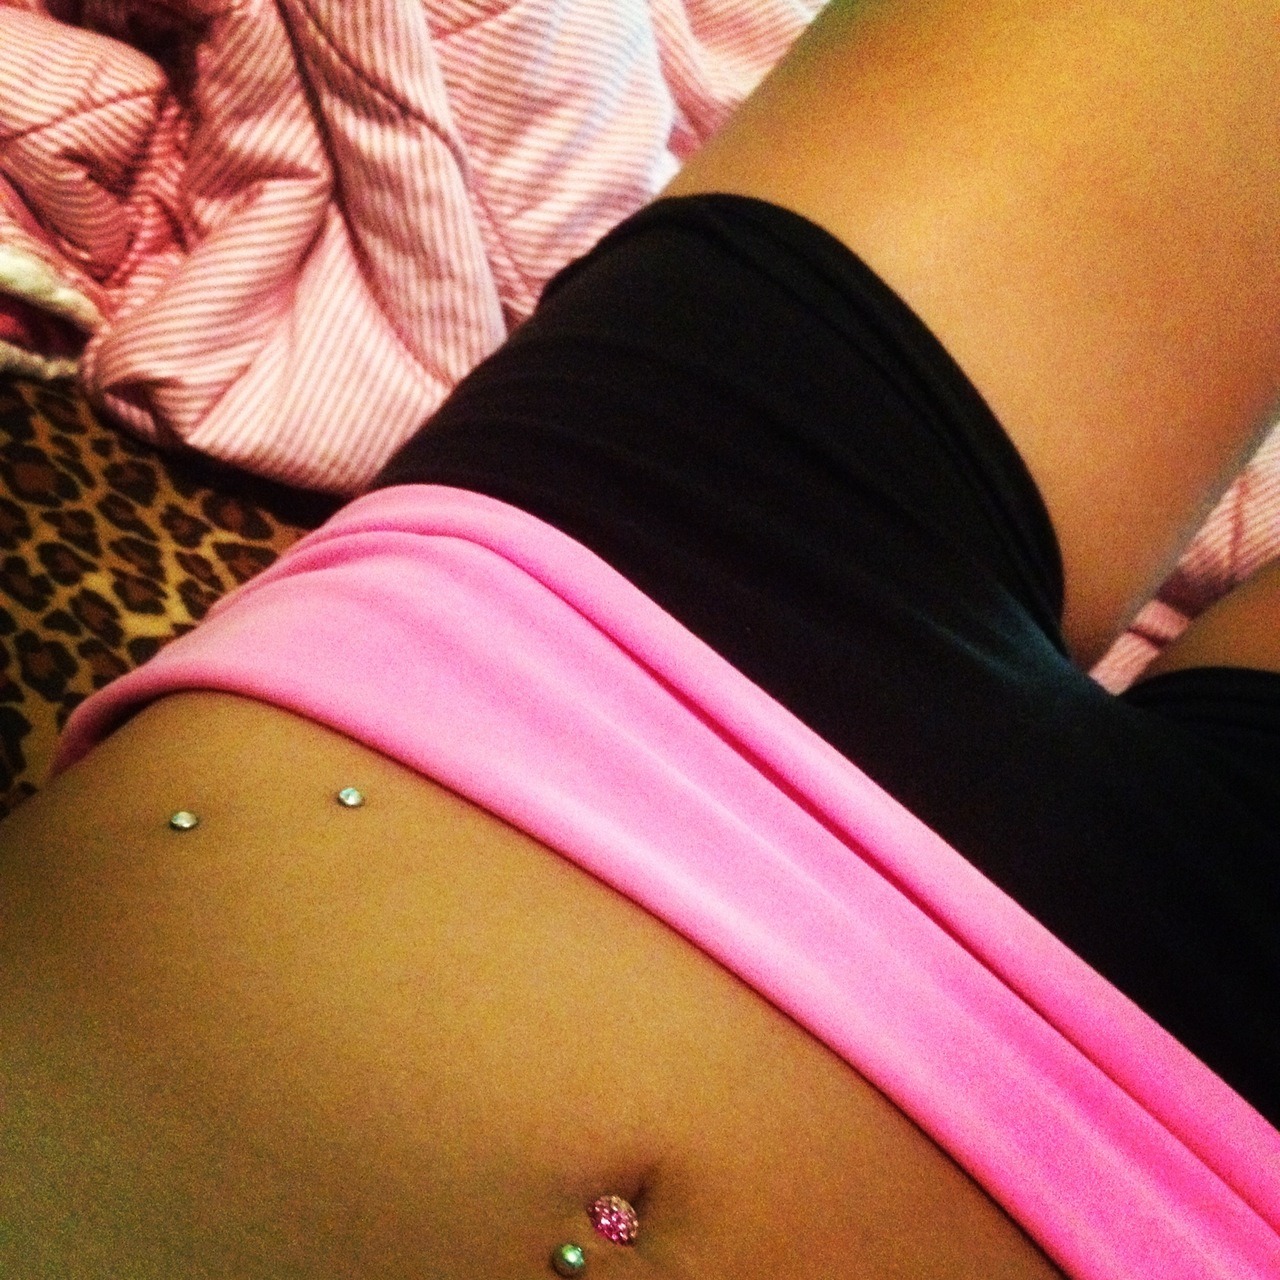 Belly button piercing tumblr